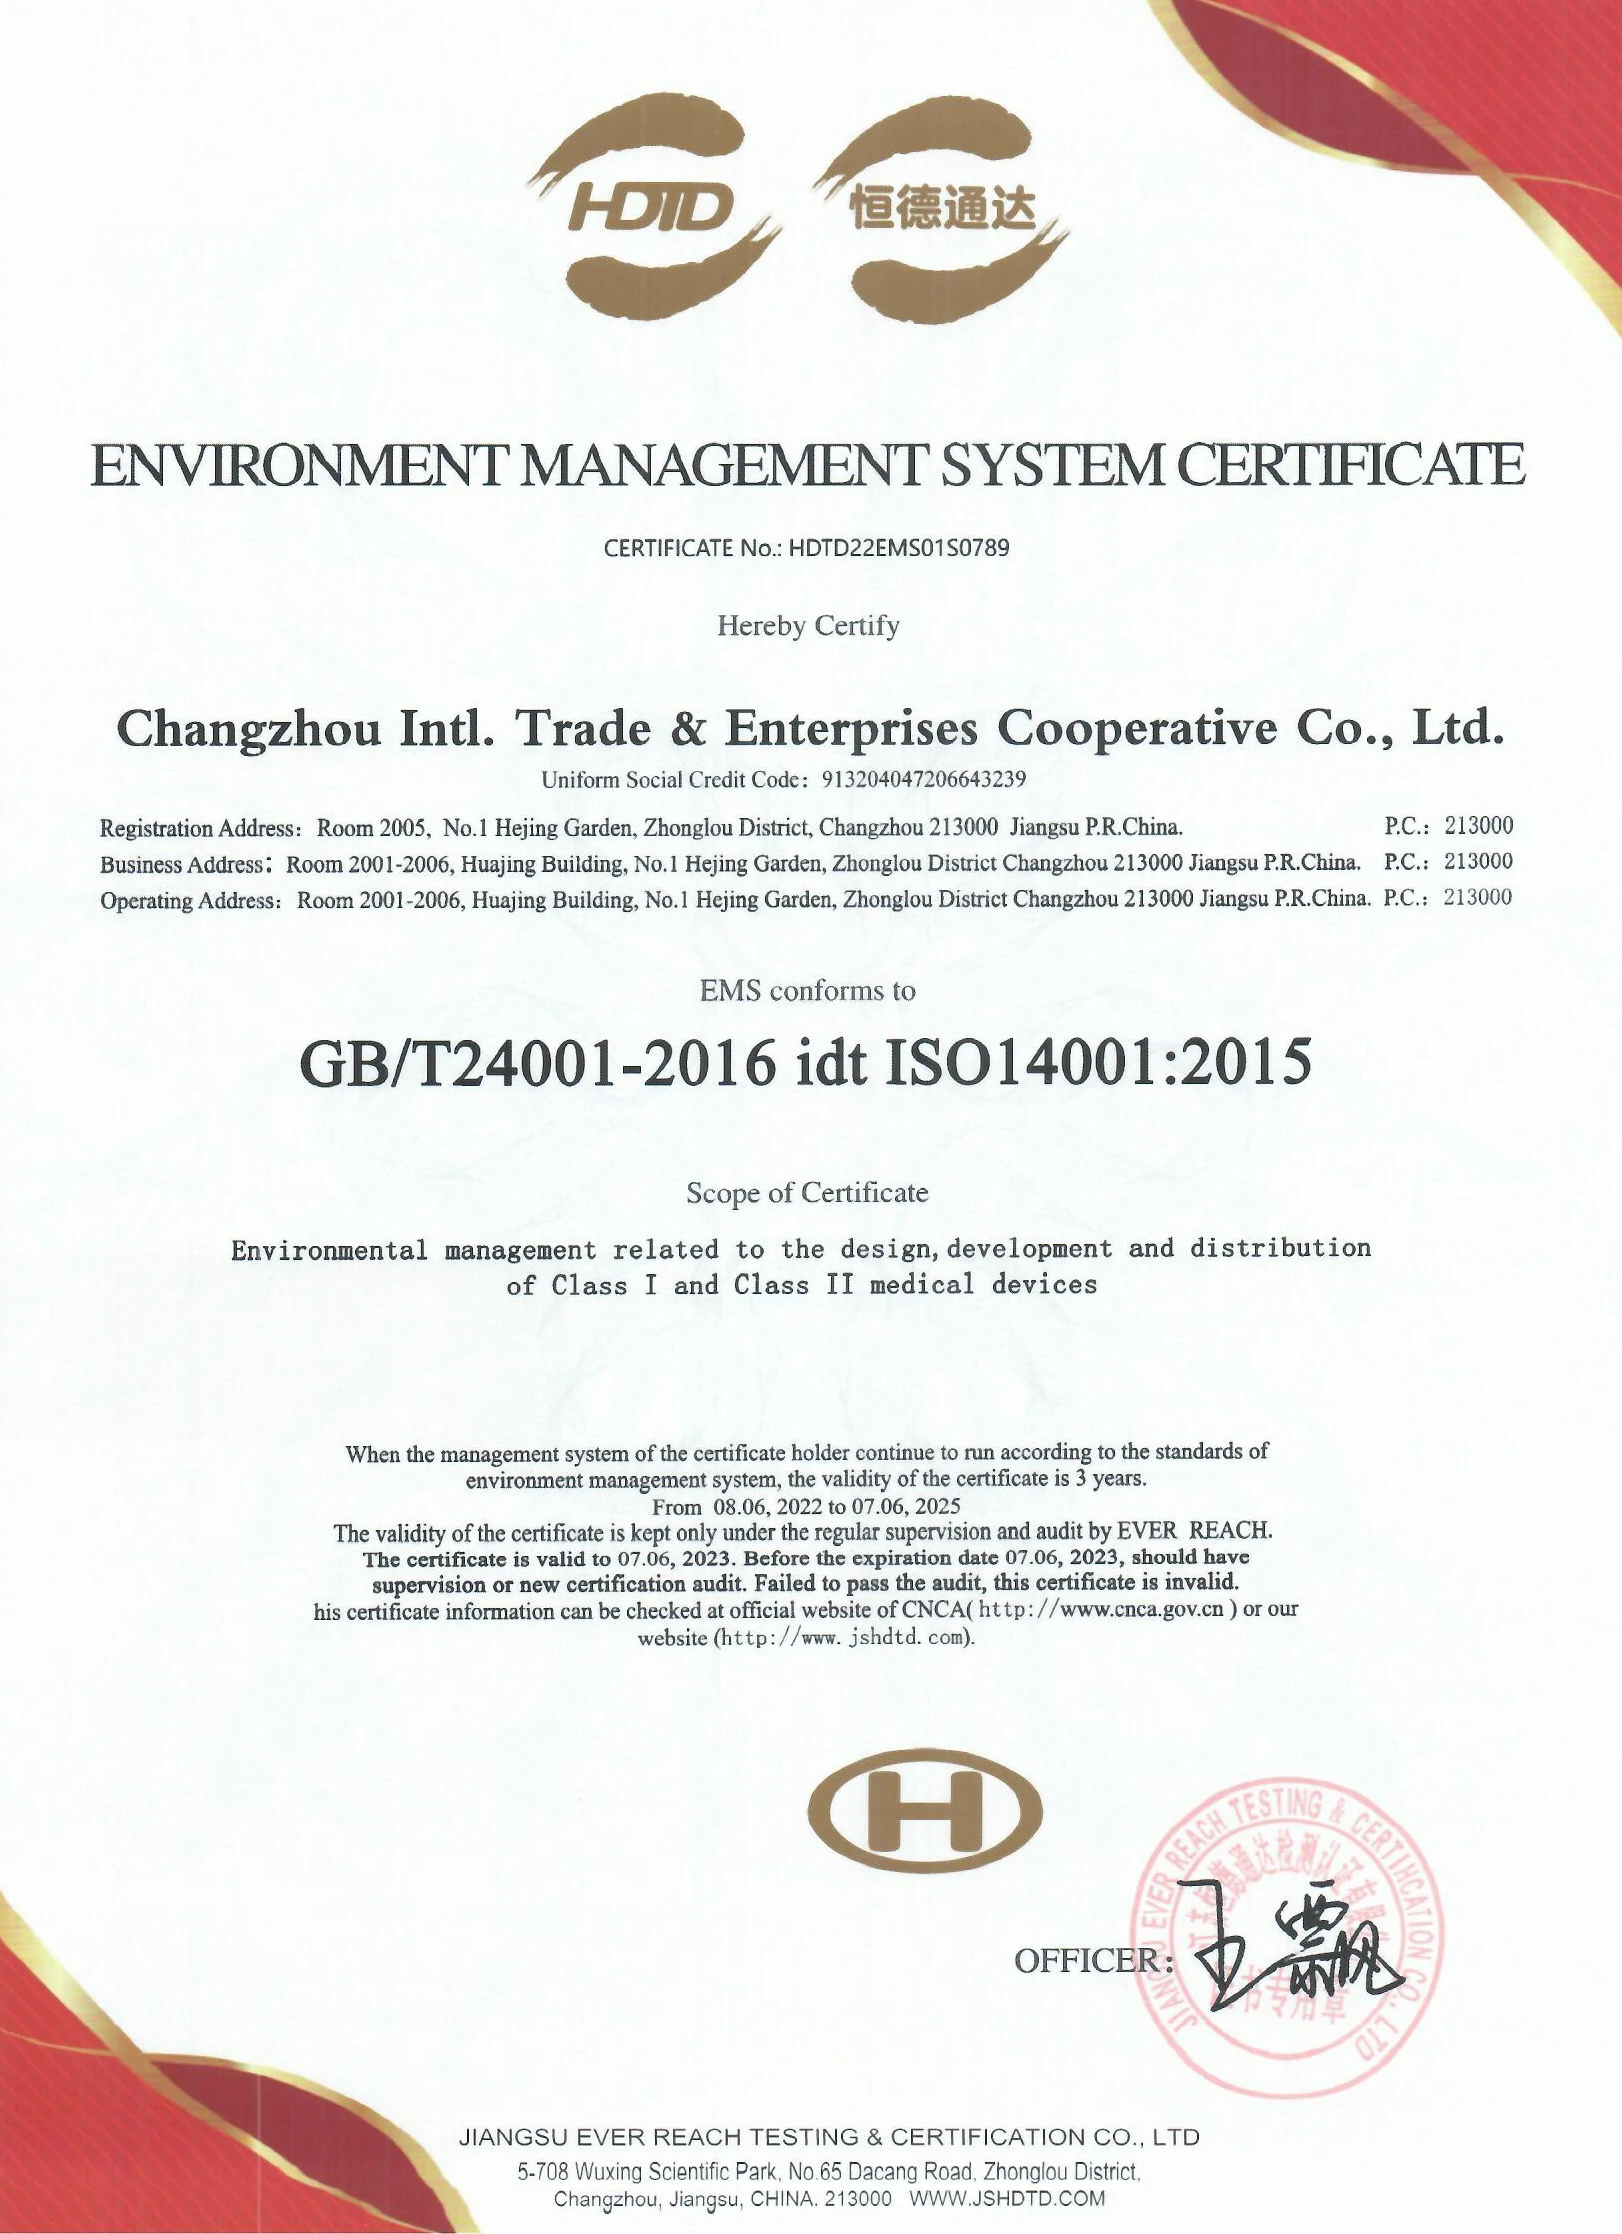  ISO14001:2015 Environmental Management System certificate